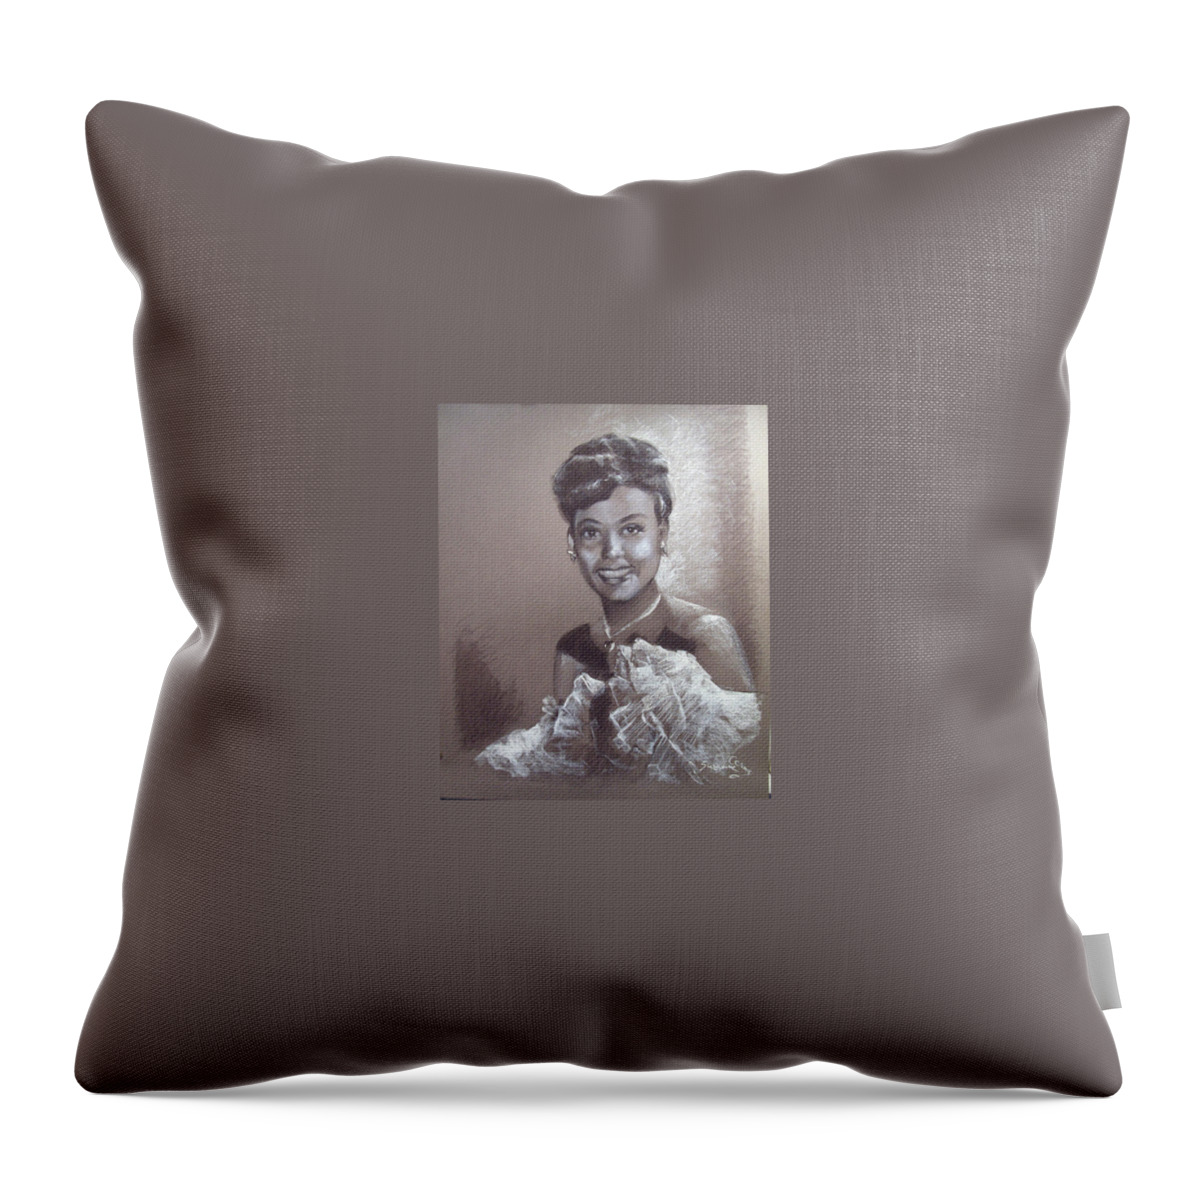 Lena Horne Throw Pillow featuring the painting Lena Horne by Suzanne Giuriati Cerny